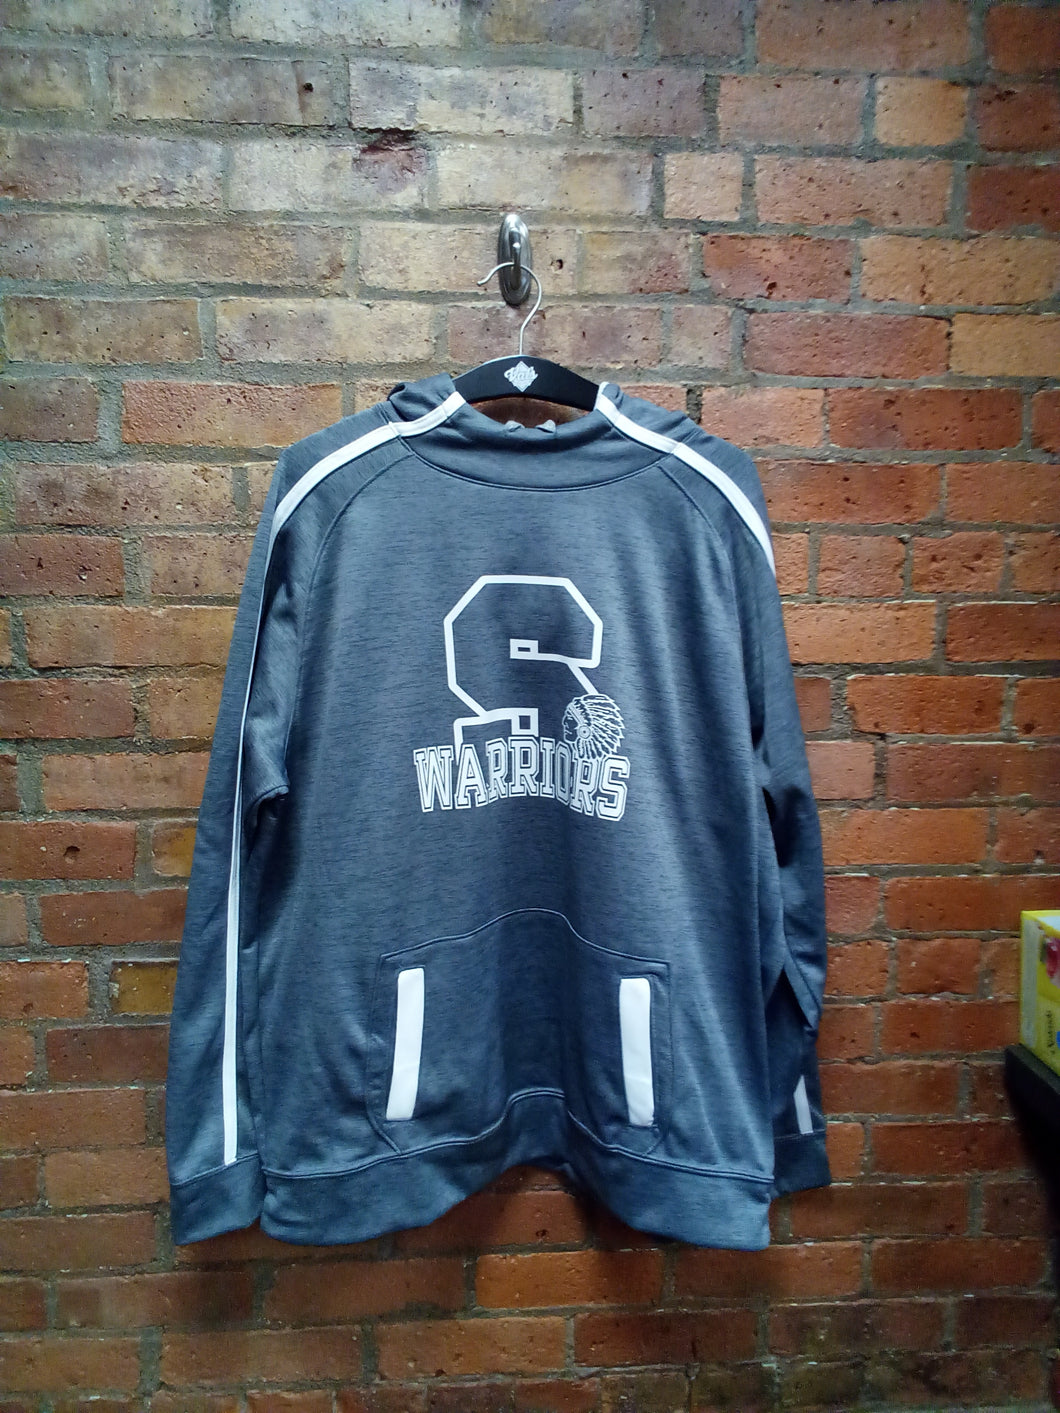 CLEARANCE - Stillwater Warriors Grey and White Performance Hooded Sweatshirt - Size XL